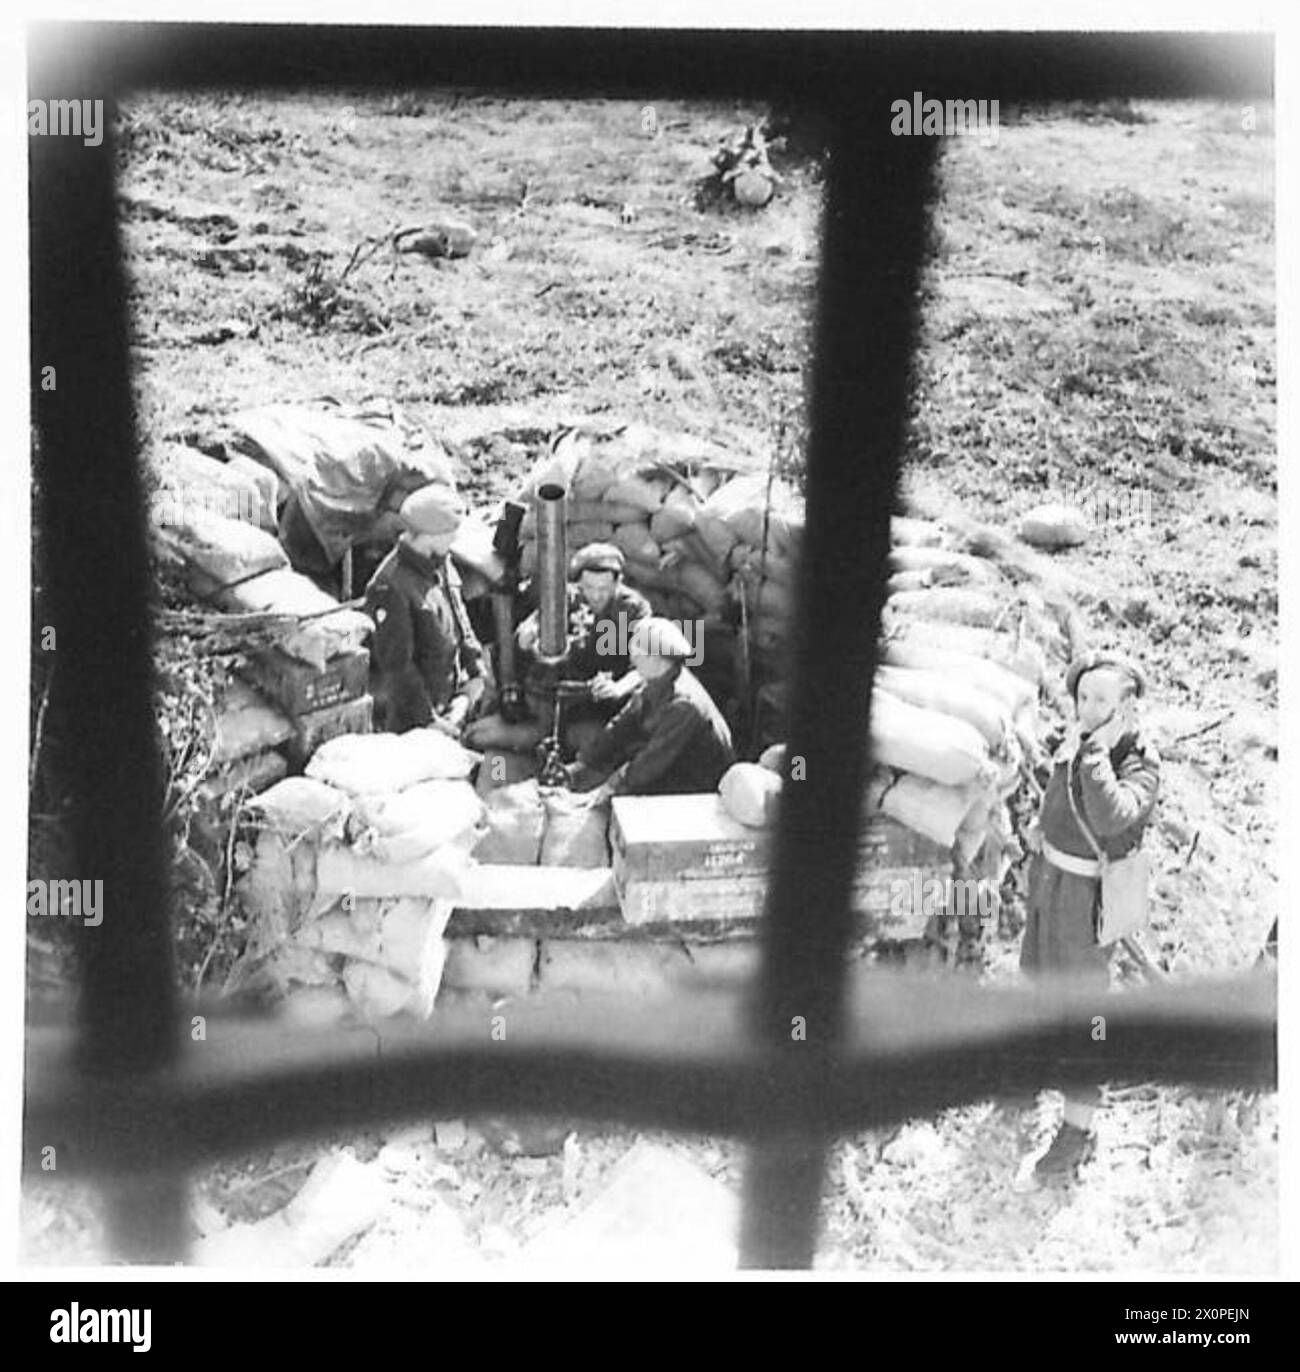 THE POLISH ARMY IN THE ITALIAN CAMPAIGN, 1943-1945 - Bird eye view of a 4.2 inch heavy mortar dugout occupied by troops of the 3rd Mortar Company, 5th Kresowa Division (2nd Polish Corps) situated next to a ruined house near the town of Castel Bolognese, 22 March 1945 British Army, Polish Army, Polish Armed Forces in the West, Polish Corps, II, Polish Armed Forces in the West, 2nd Corps, 5th 'Kresowa' Infantry Division, 8th Army Stock Photo